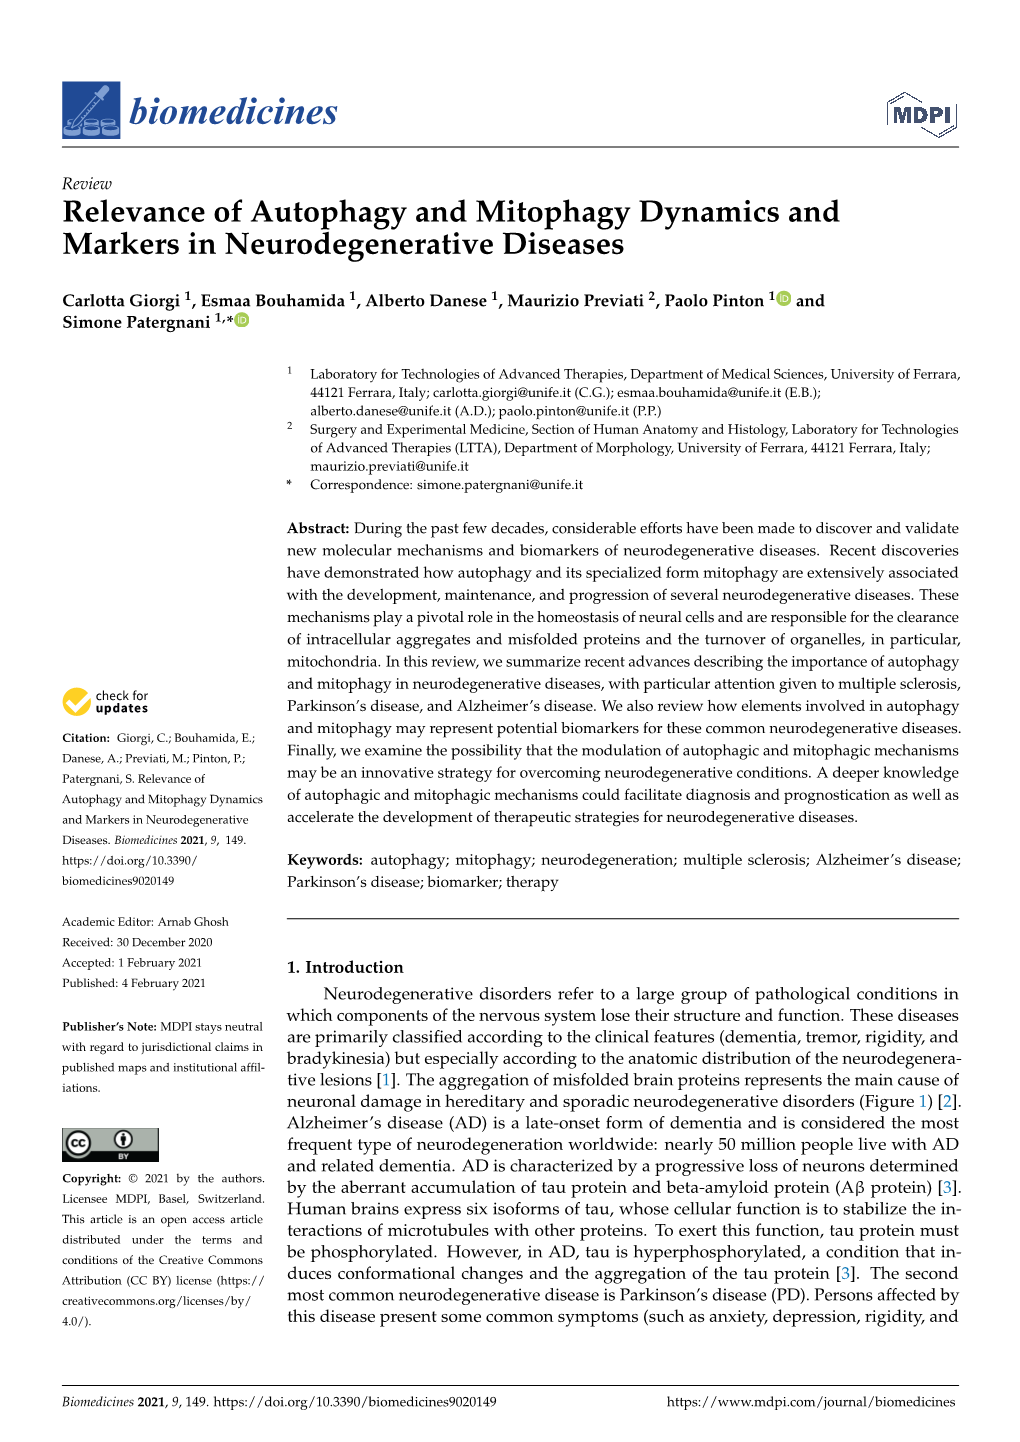 Relevance of Autophagy and Mitophagy Dynamics and Markers in Neurodegenerative Diseases